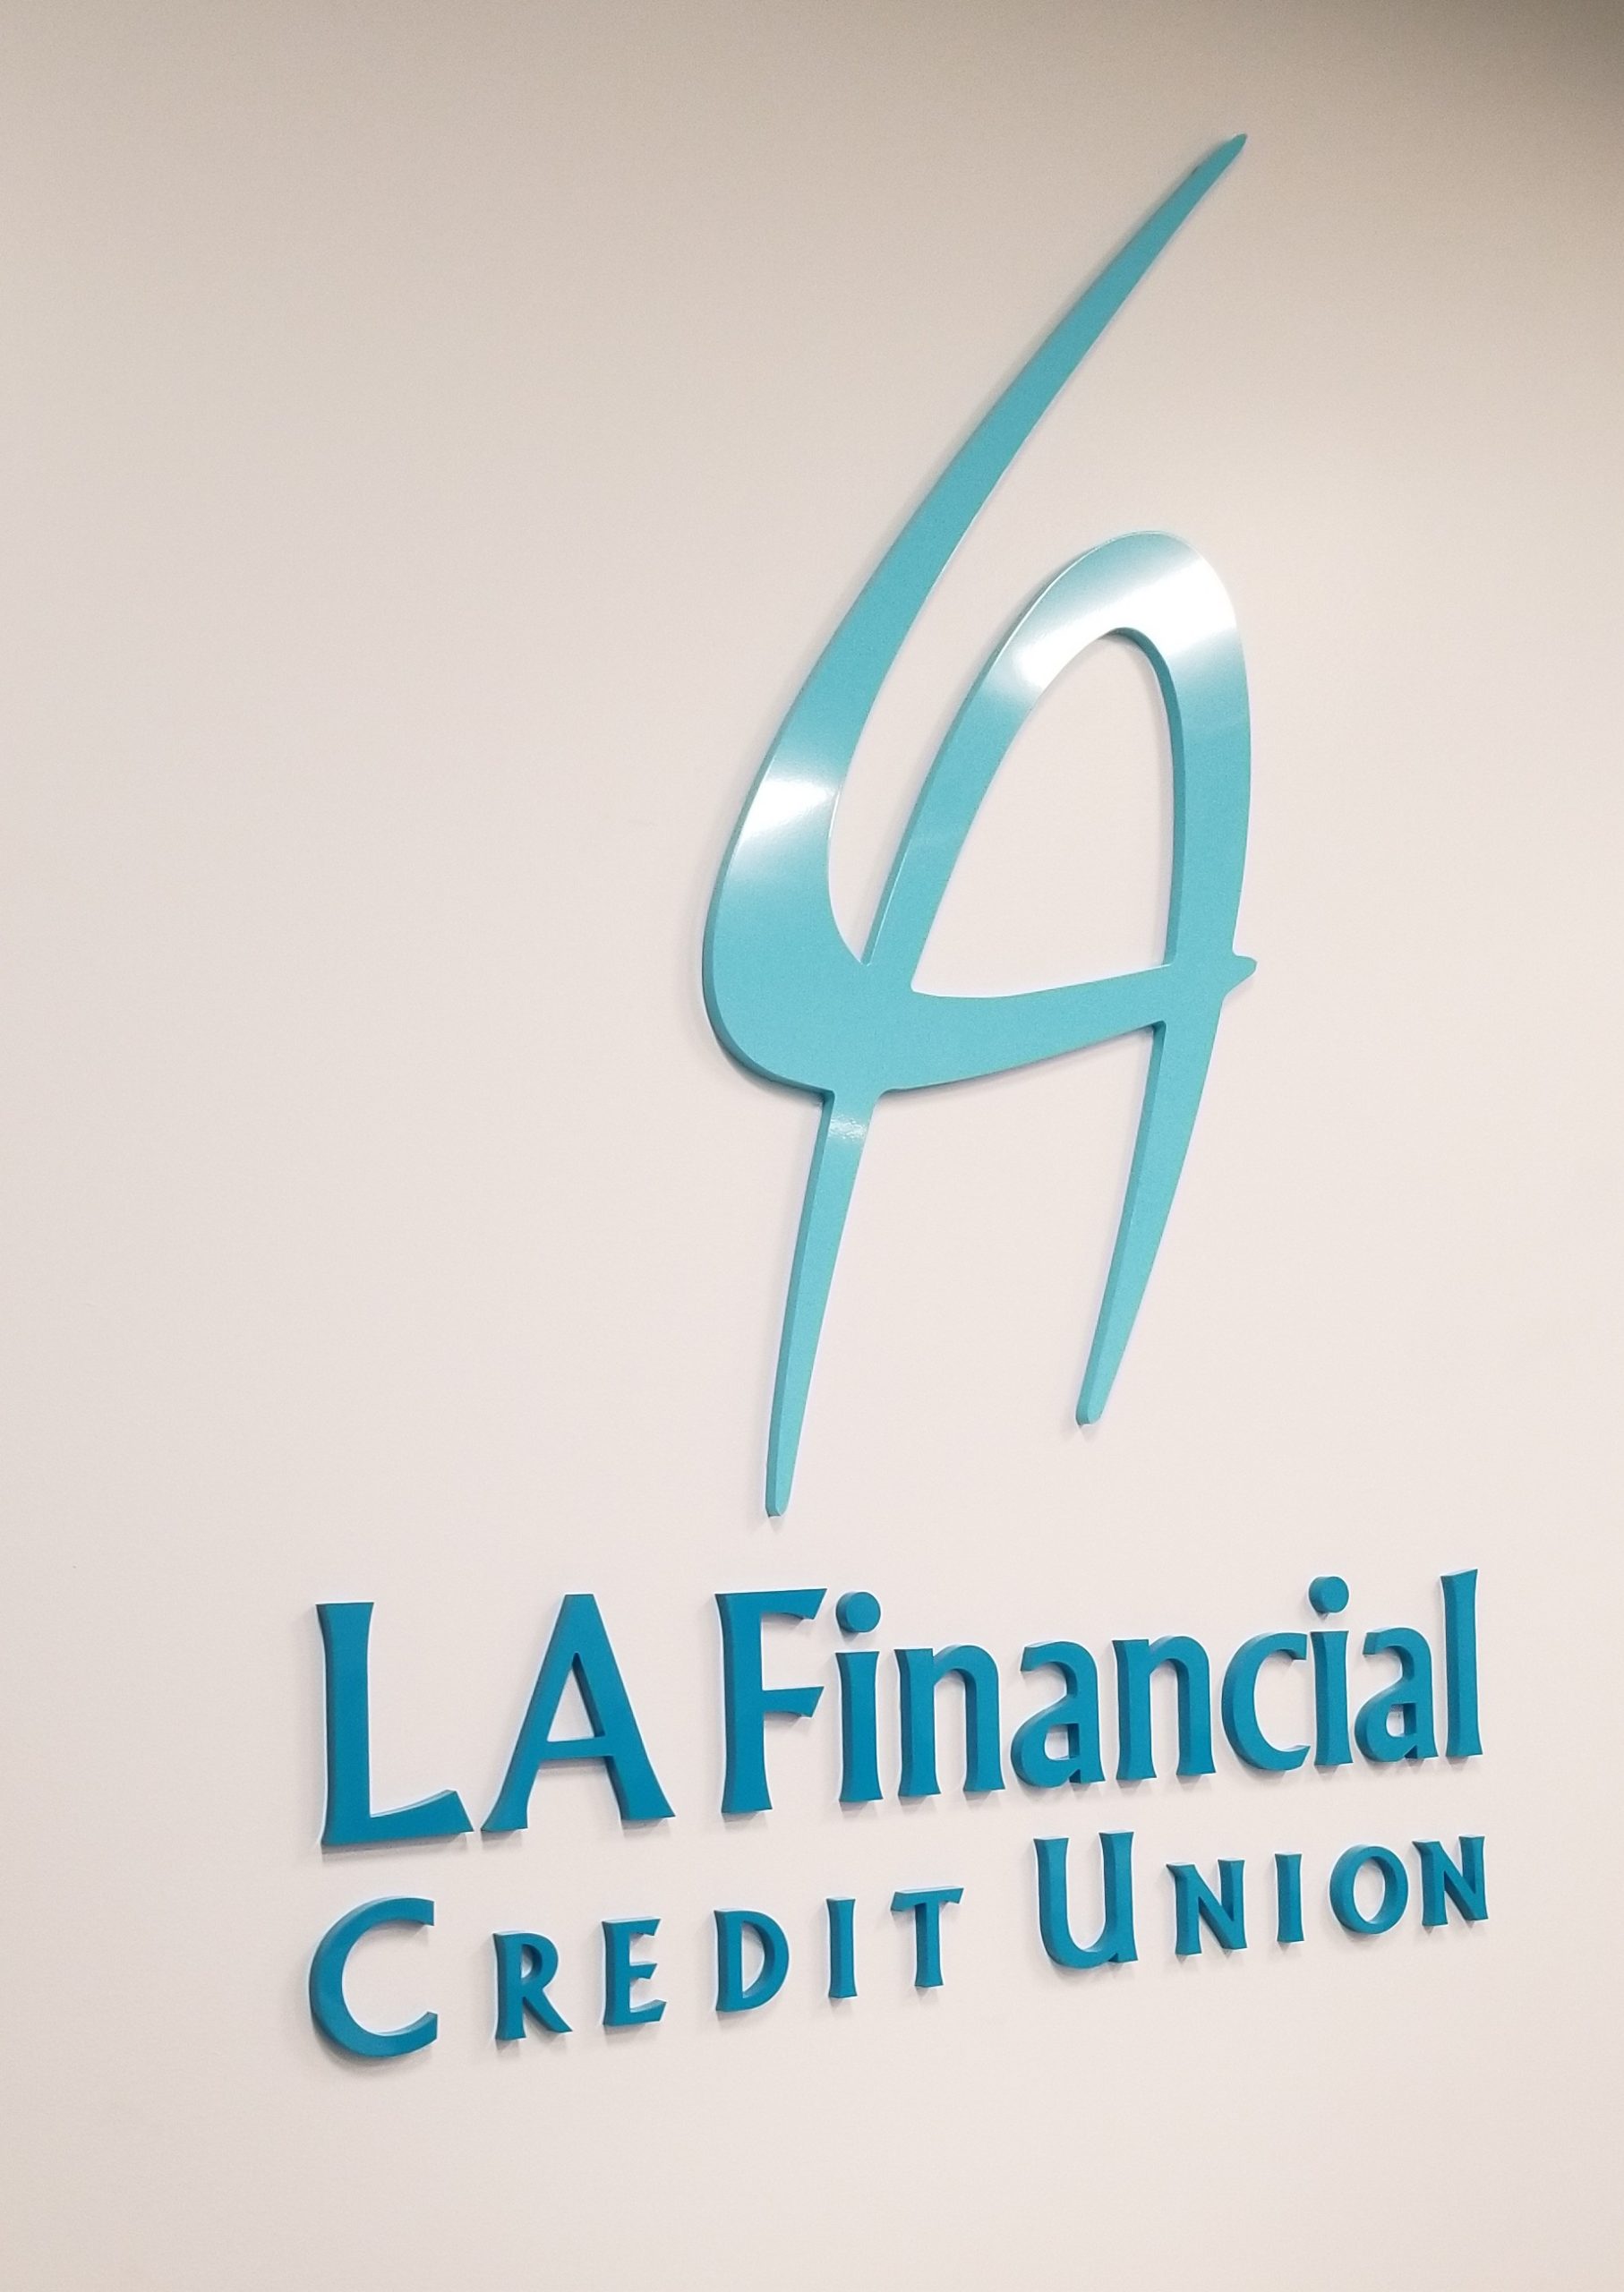 Part of a business sign package for LA Financial, this office lobby sign will definitely spruce up their workplace and make it more eye-catching for clients